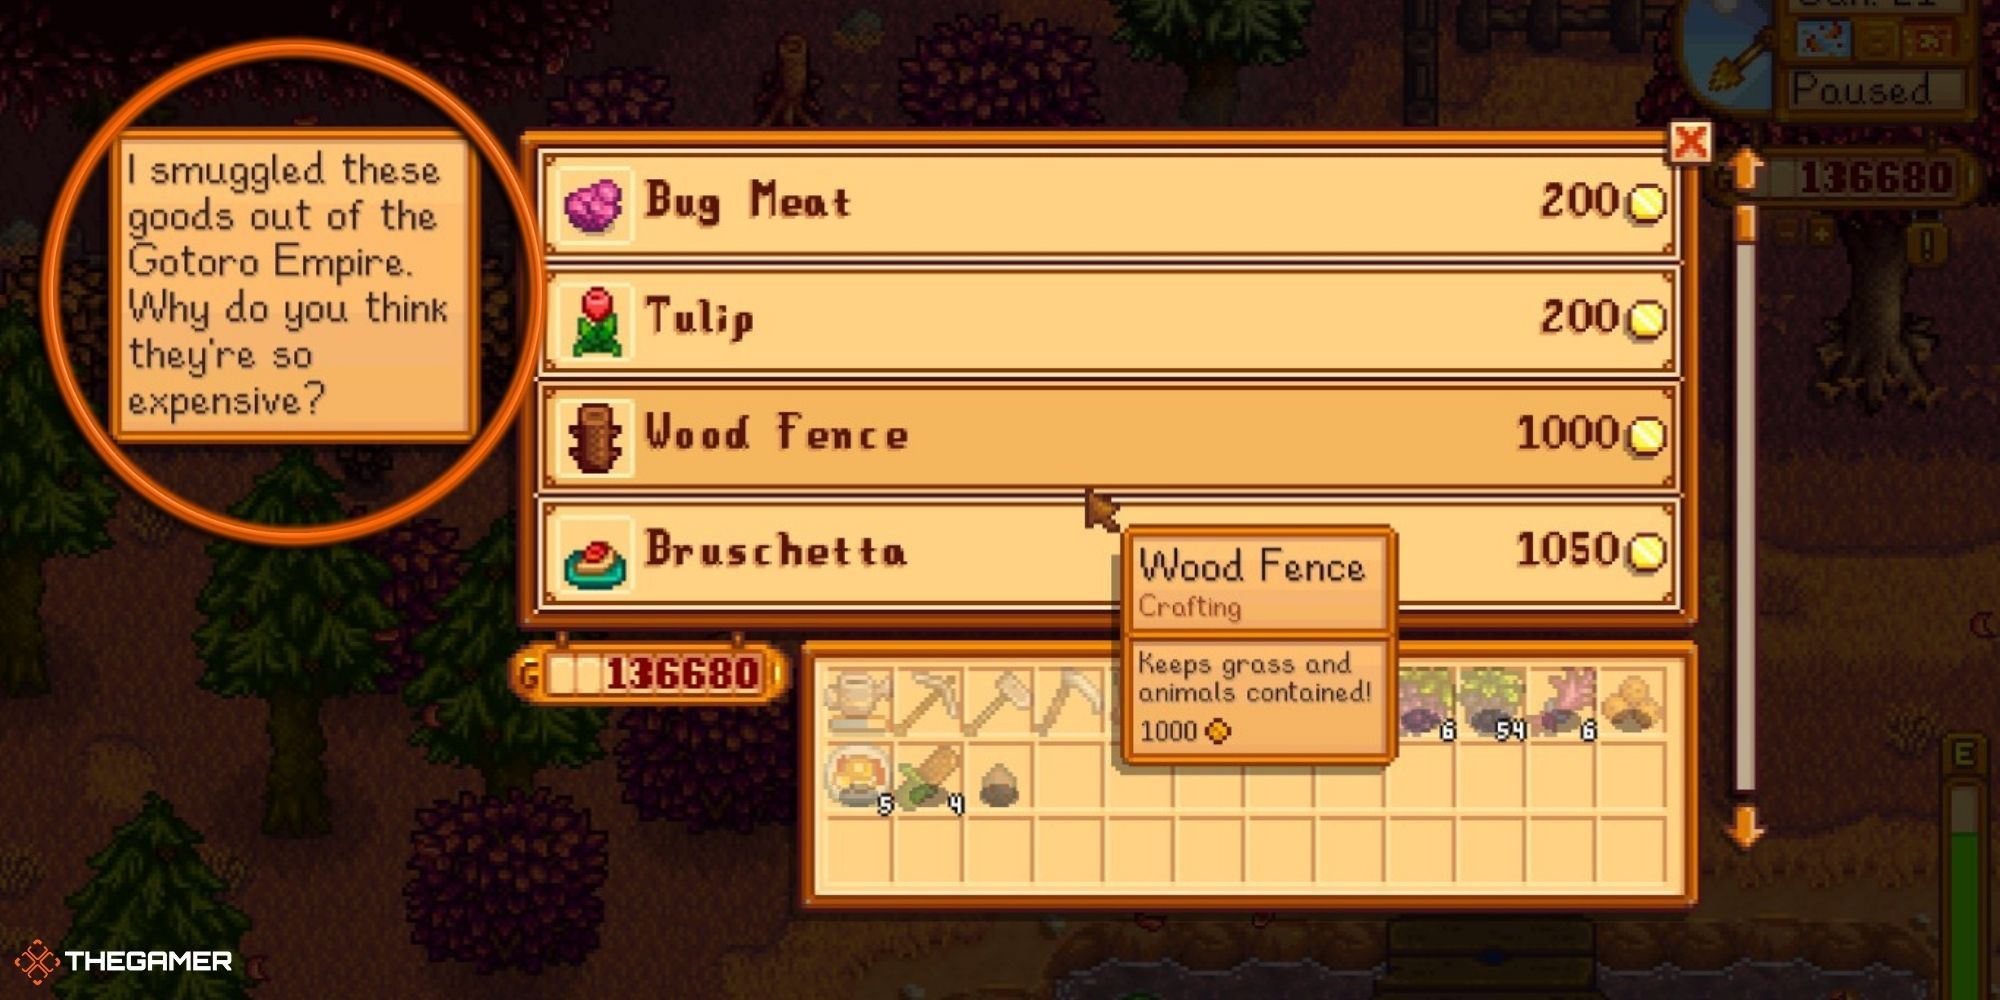 Stardew Valley - Travelling Merchant talking about the Gotoro Empire